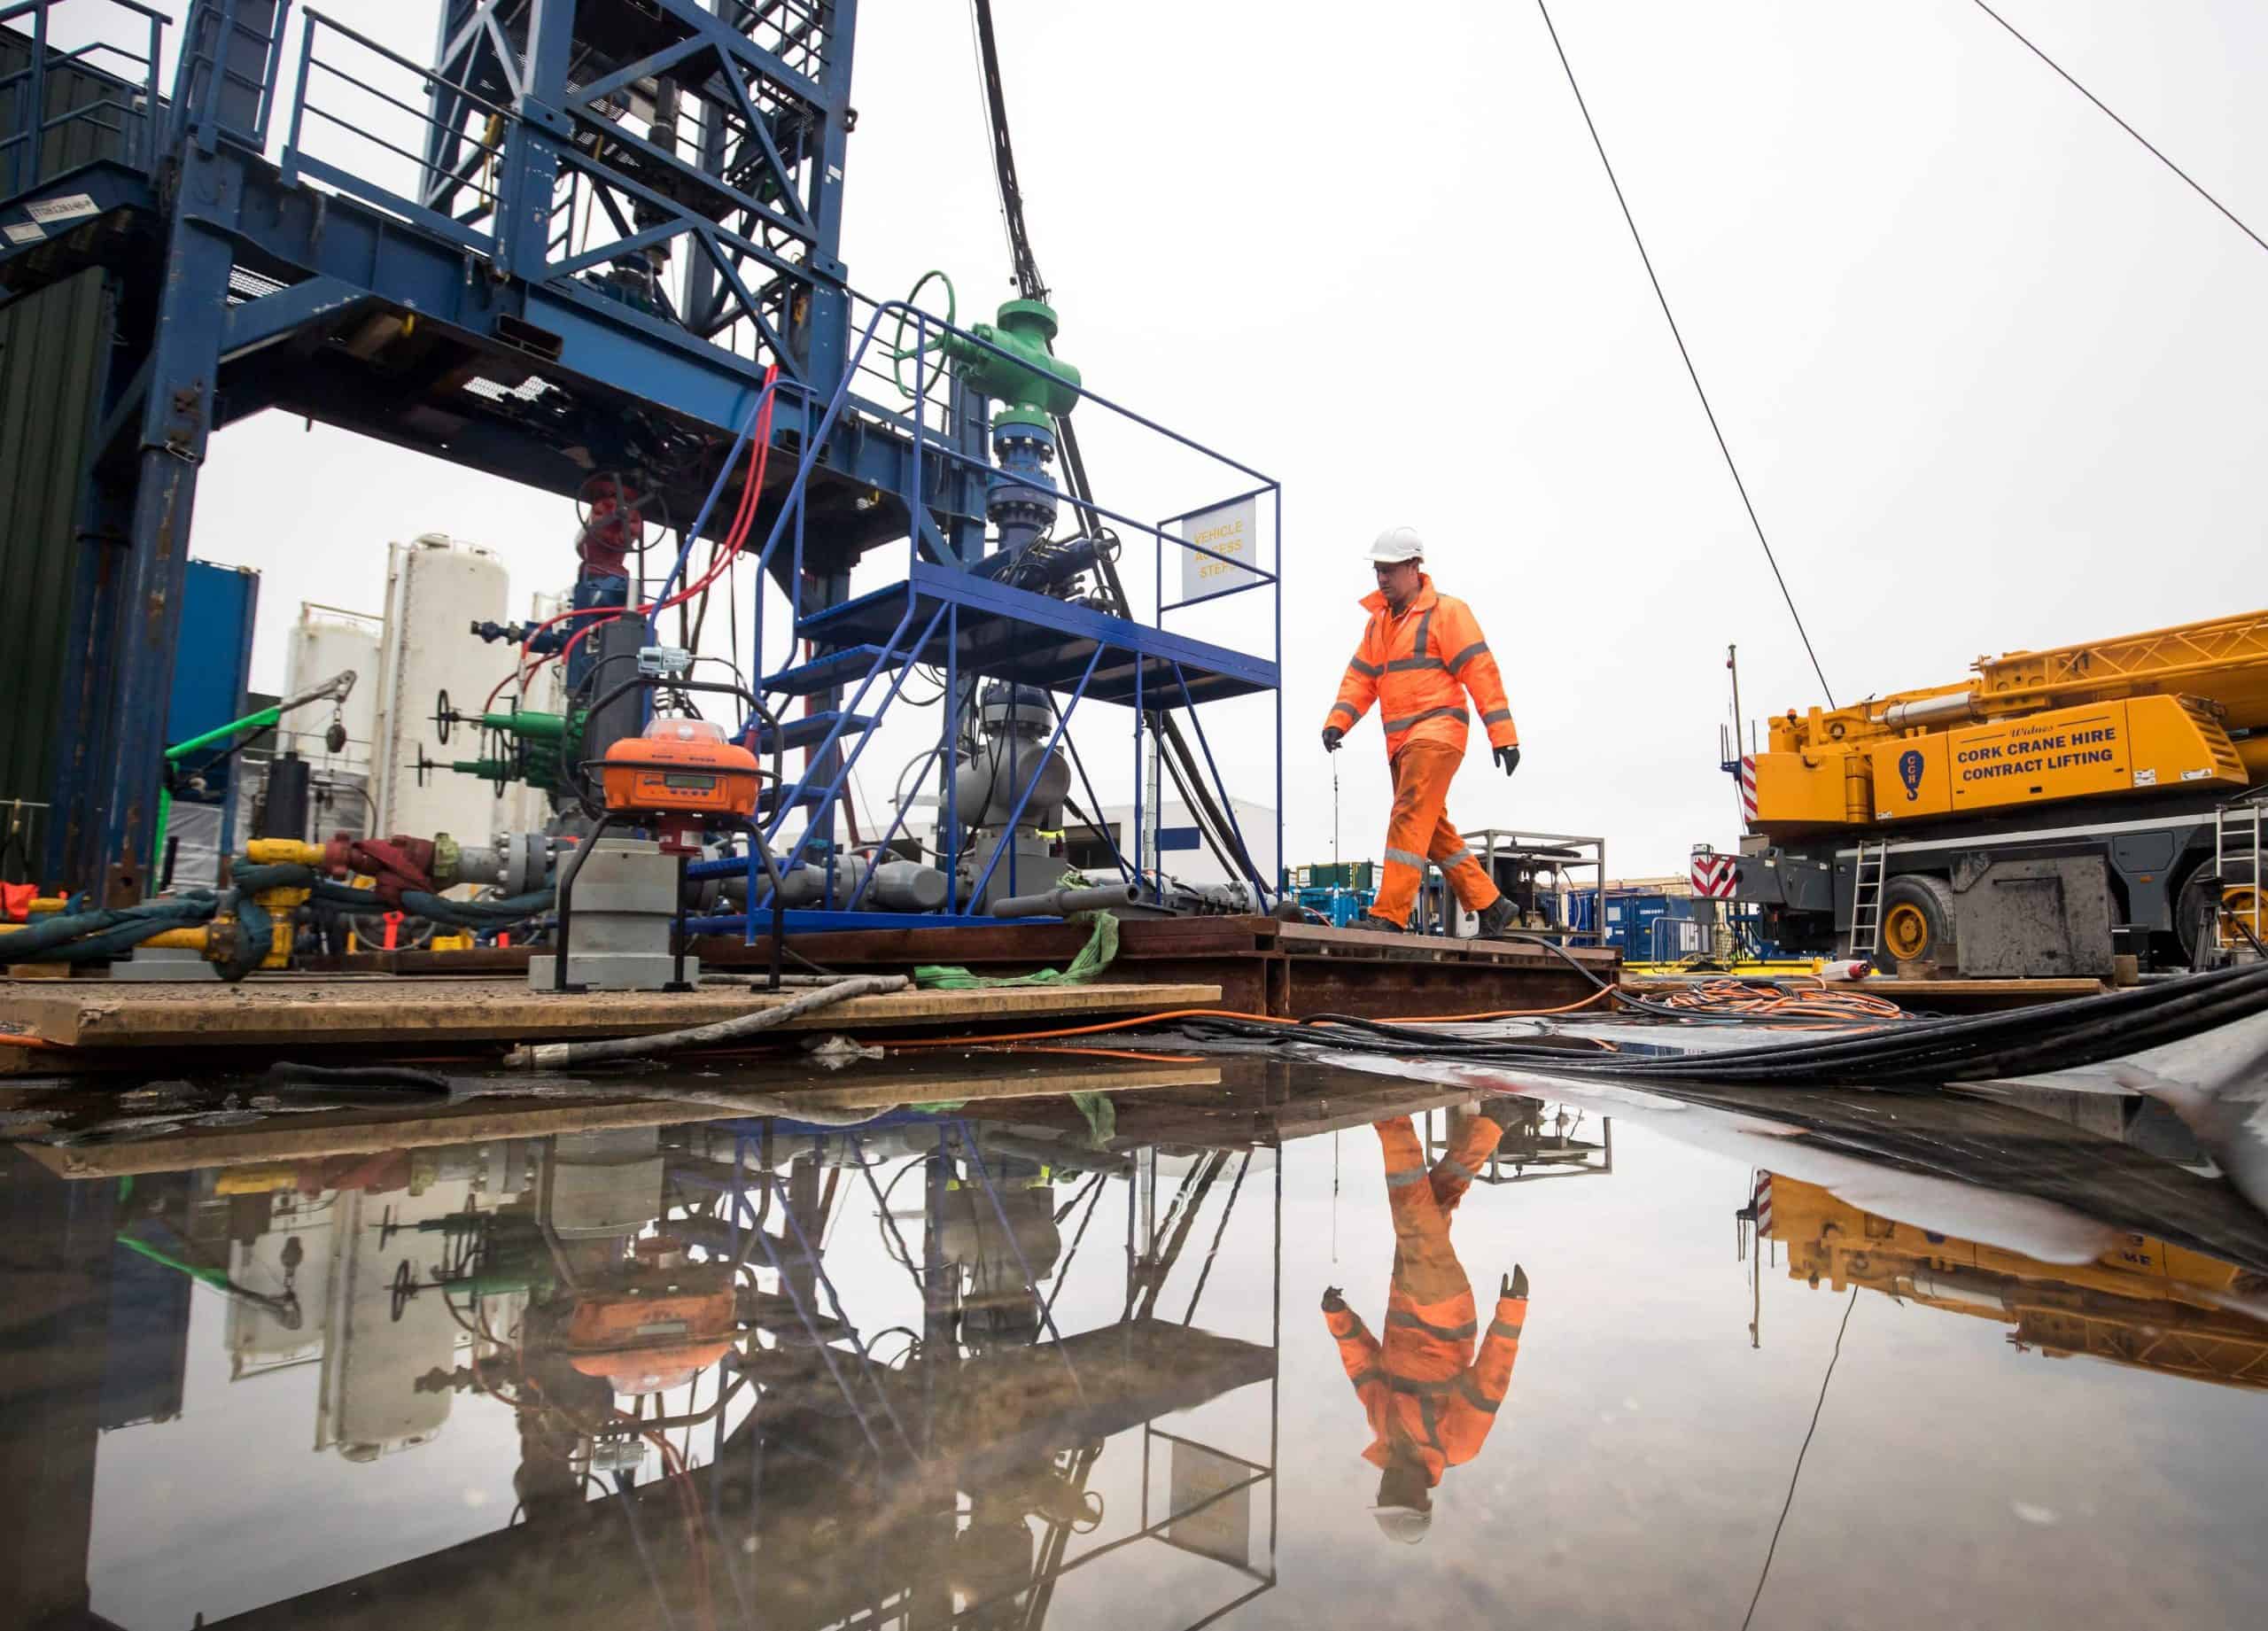 Shale-hungry Tories call for law change to allow fracking